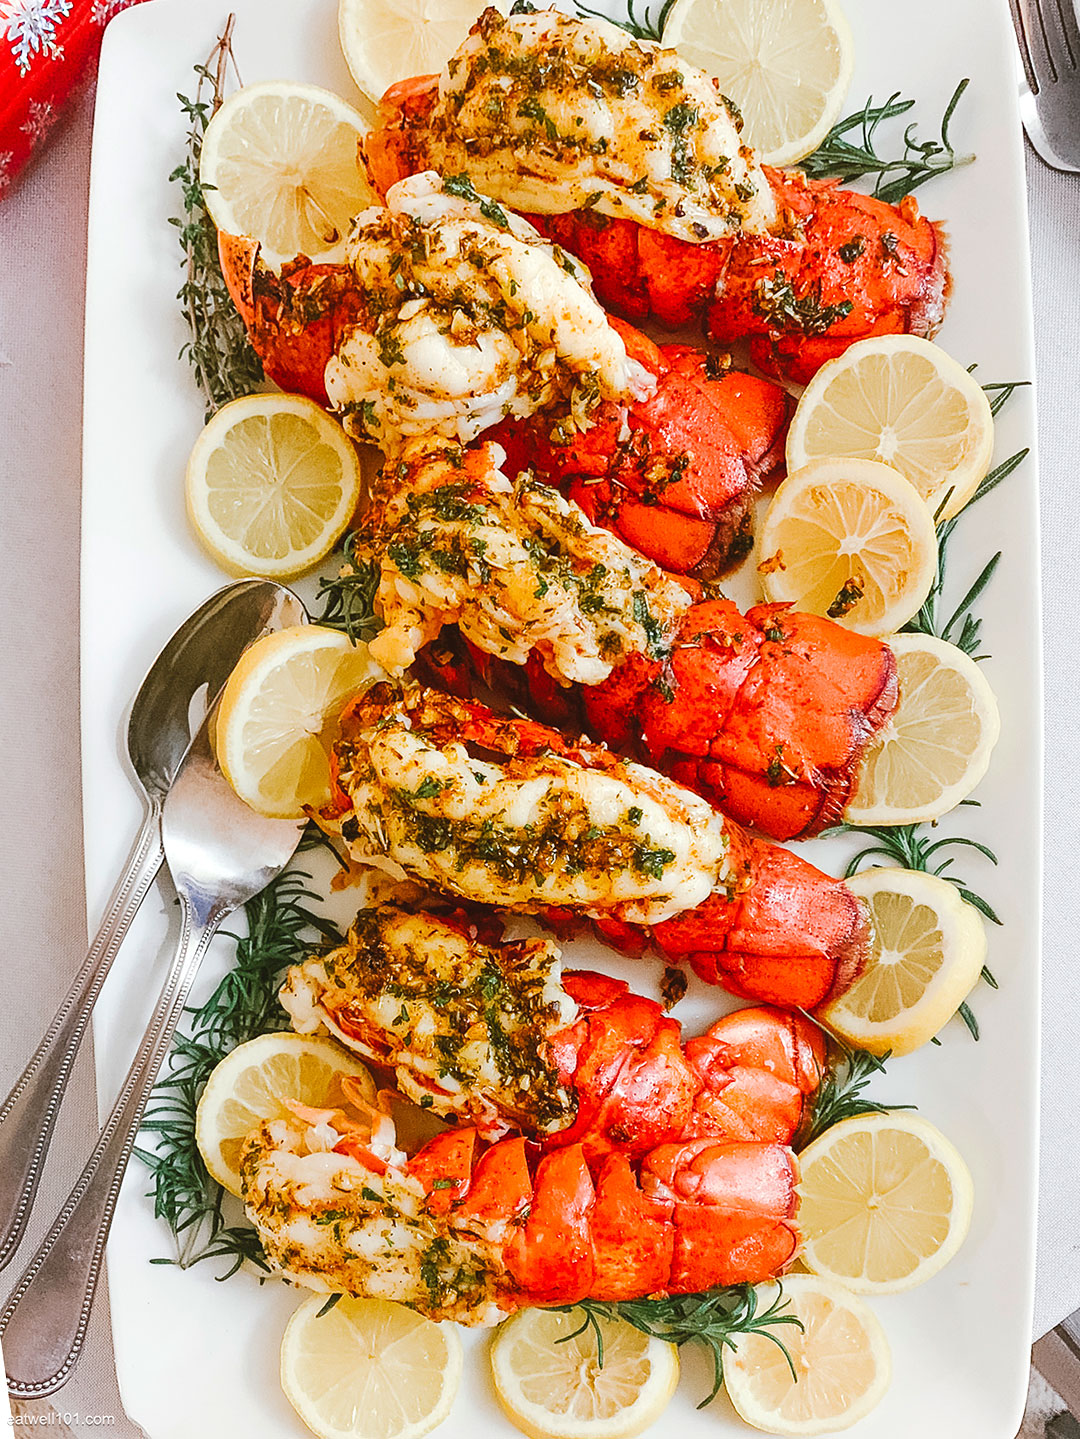 Baked Lobster Tails Recipe with Garlic Herb Butter